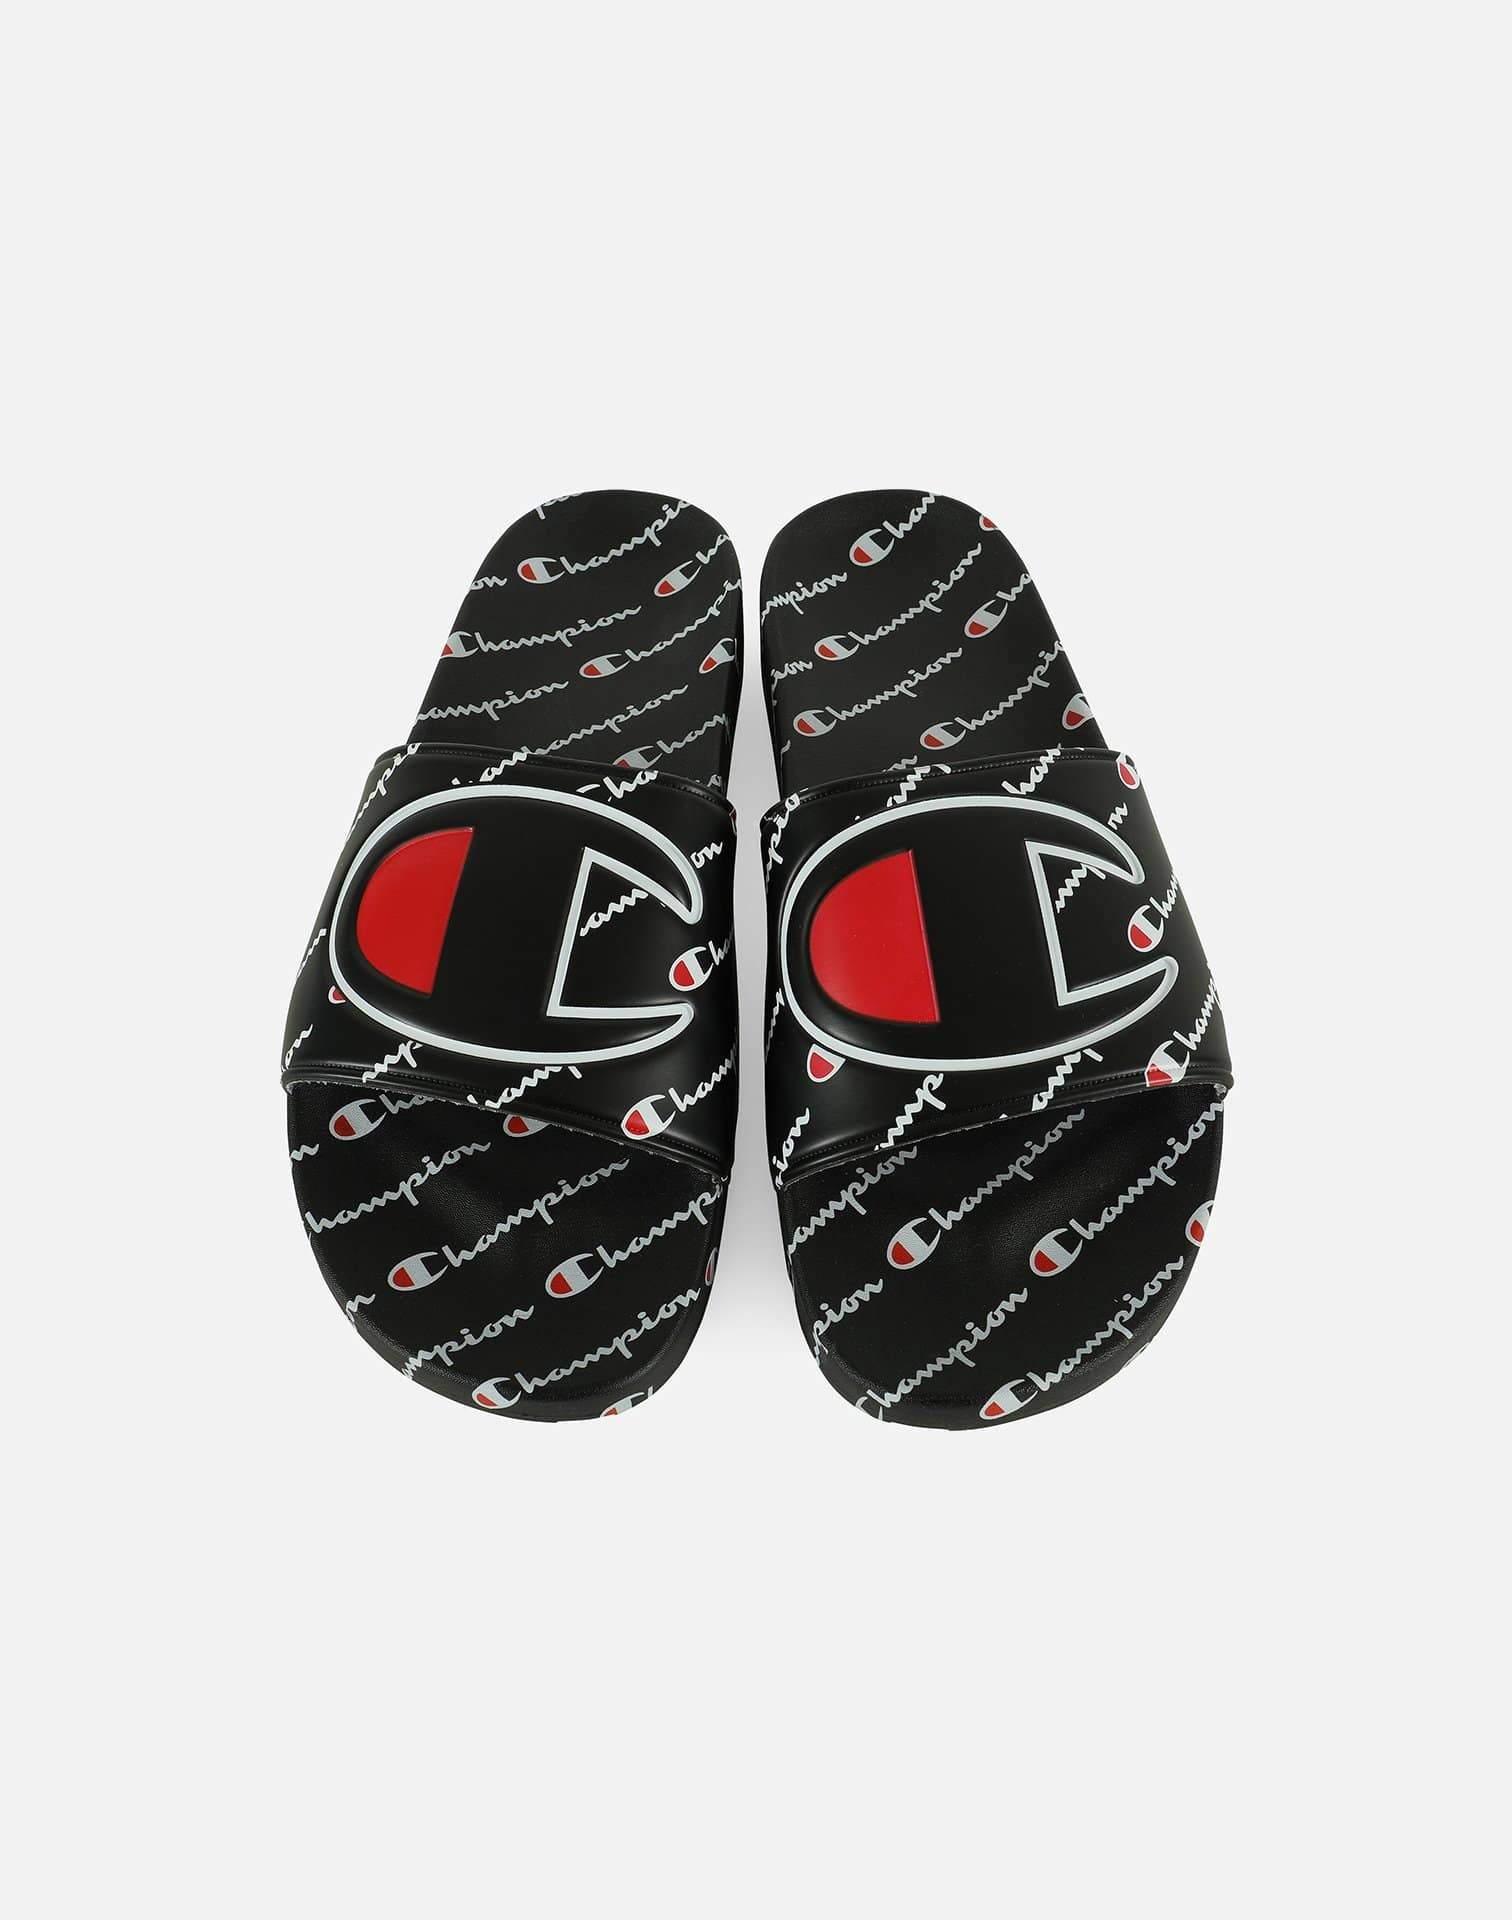 Champion Rubber Black Ipo Repeat Slides for Men - Save 64% - Lyst